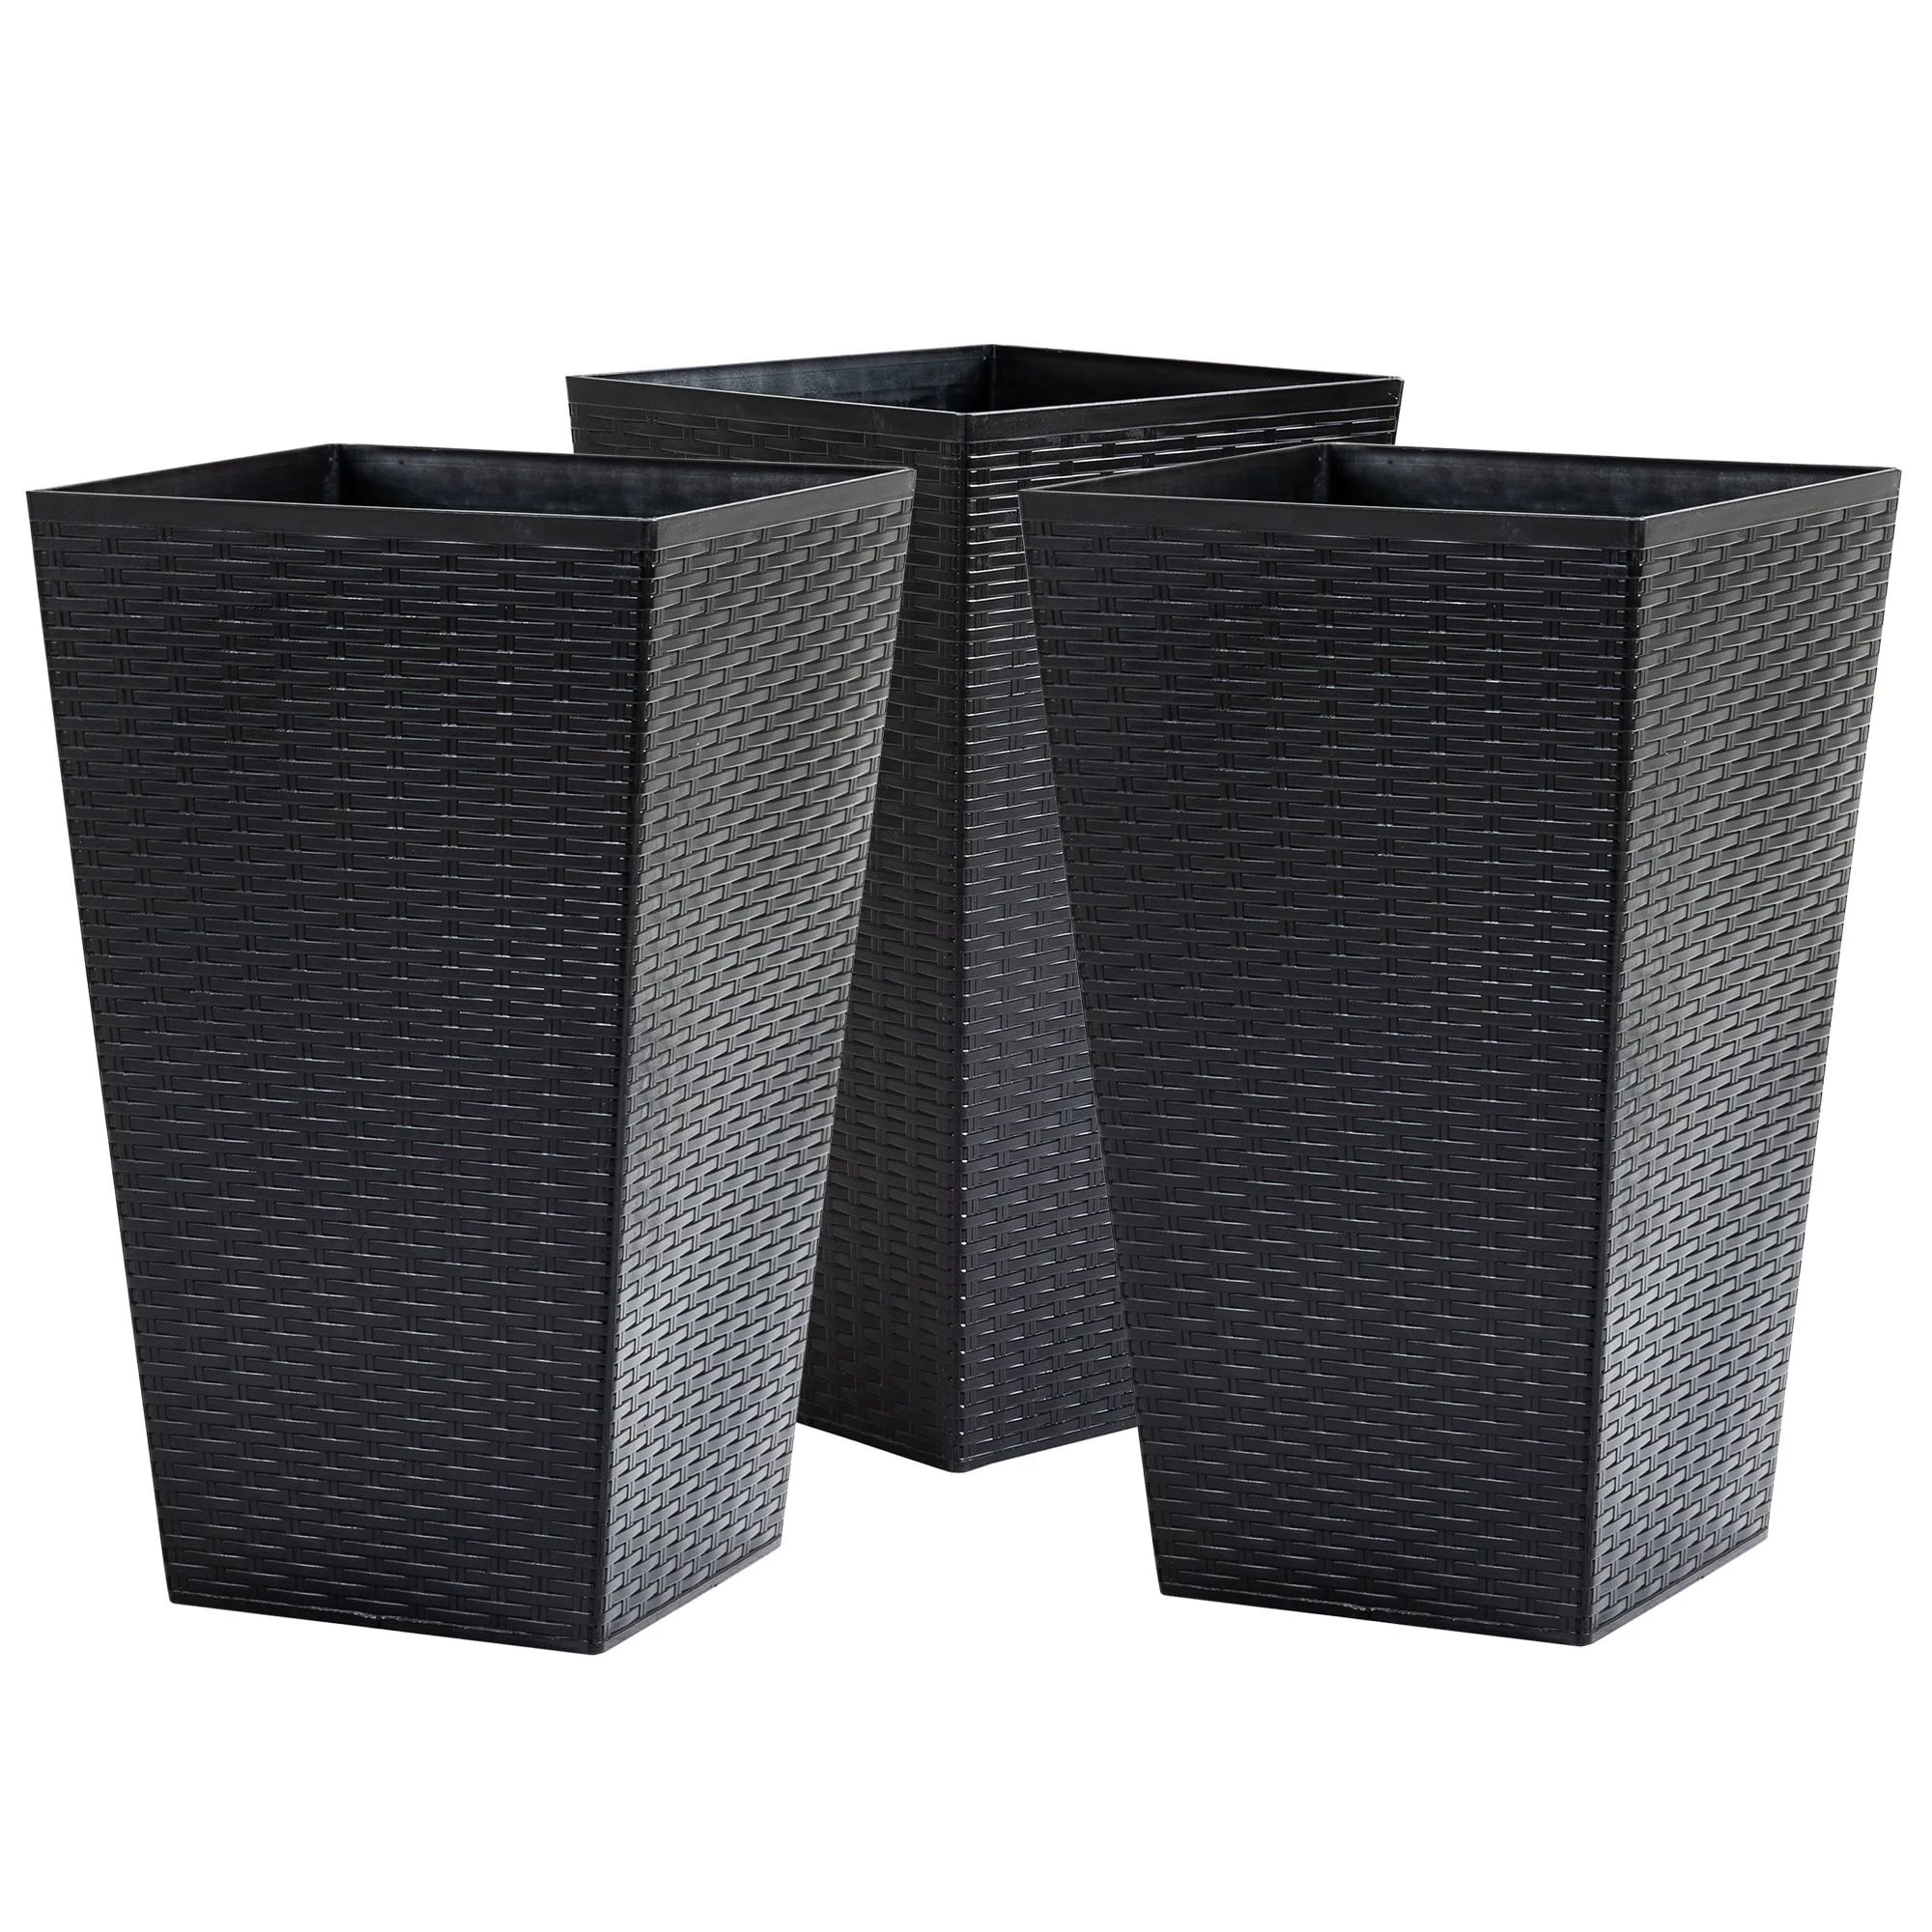 Outsunny Set of 3 Tall Planters with Drainage Hole, Black | Walmart (US)